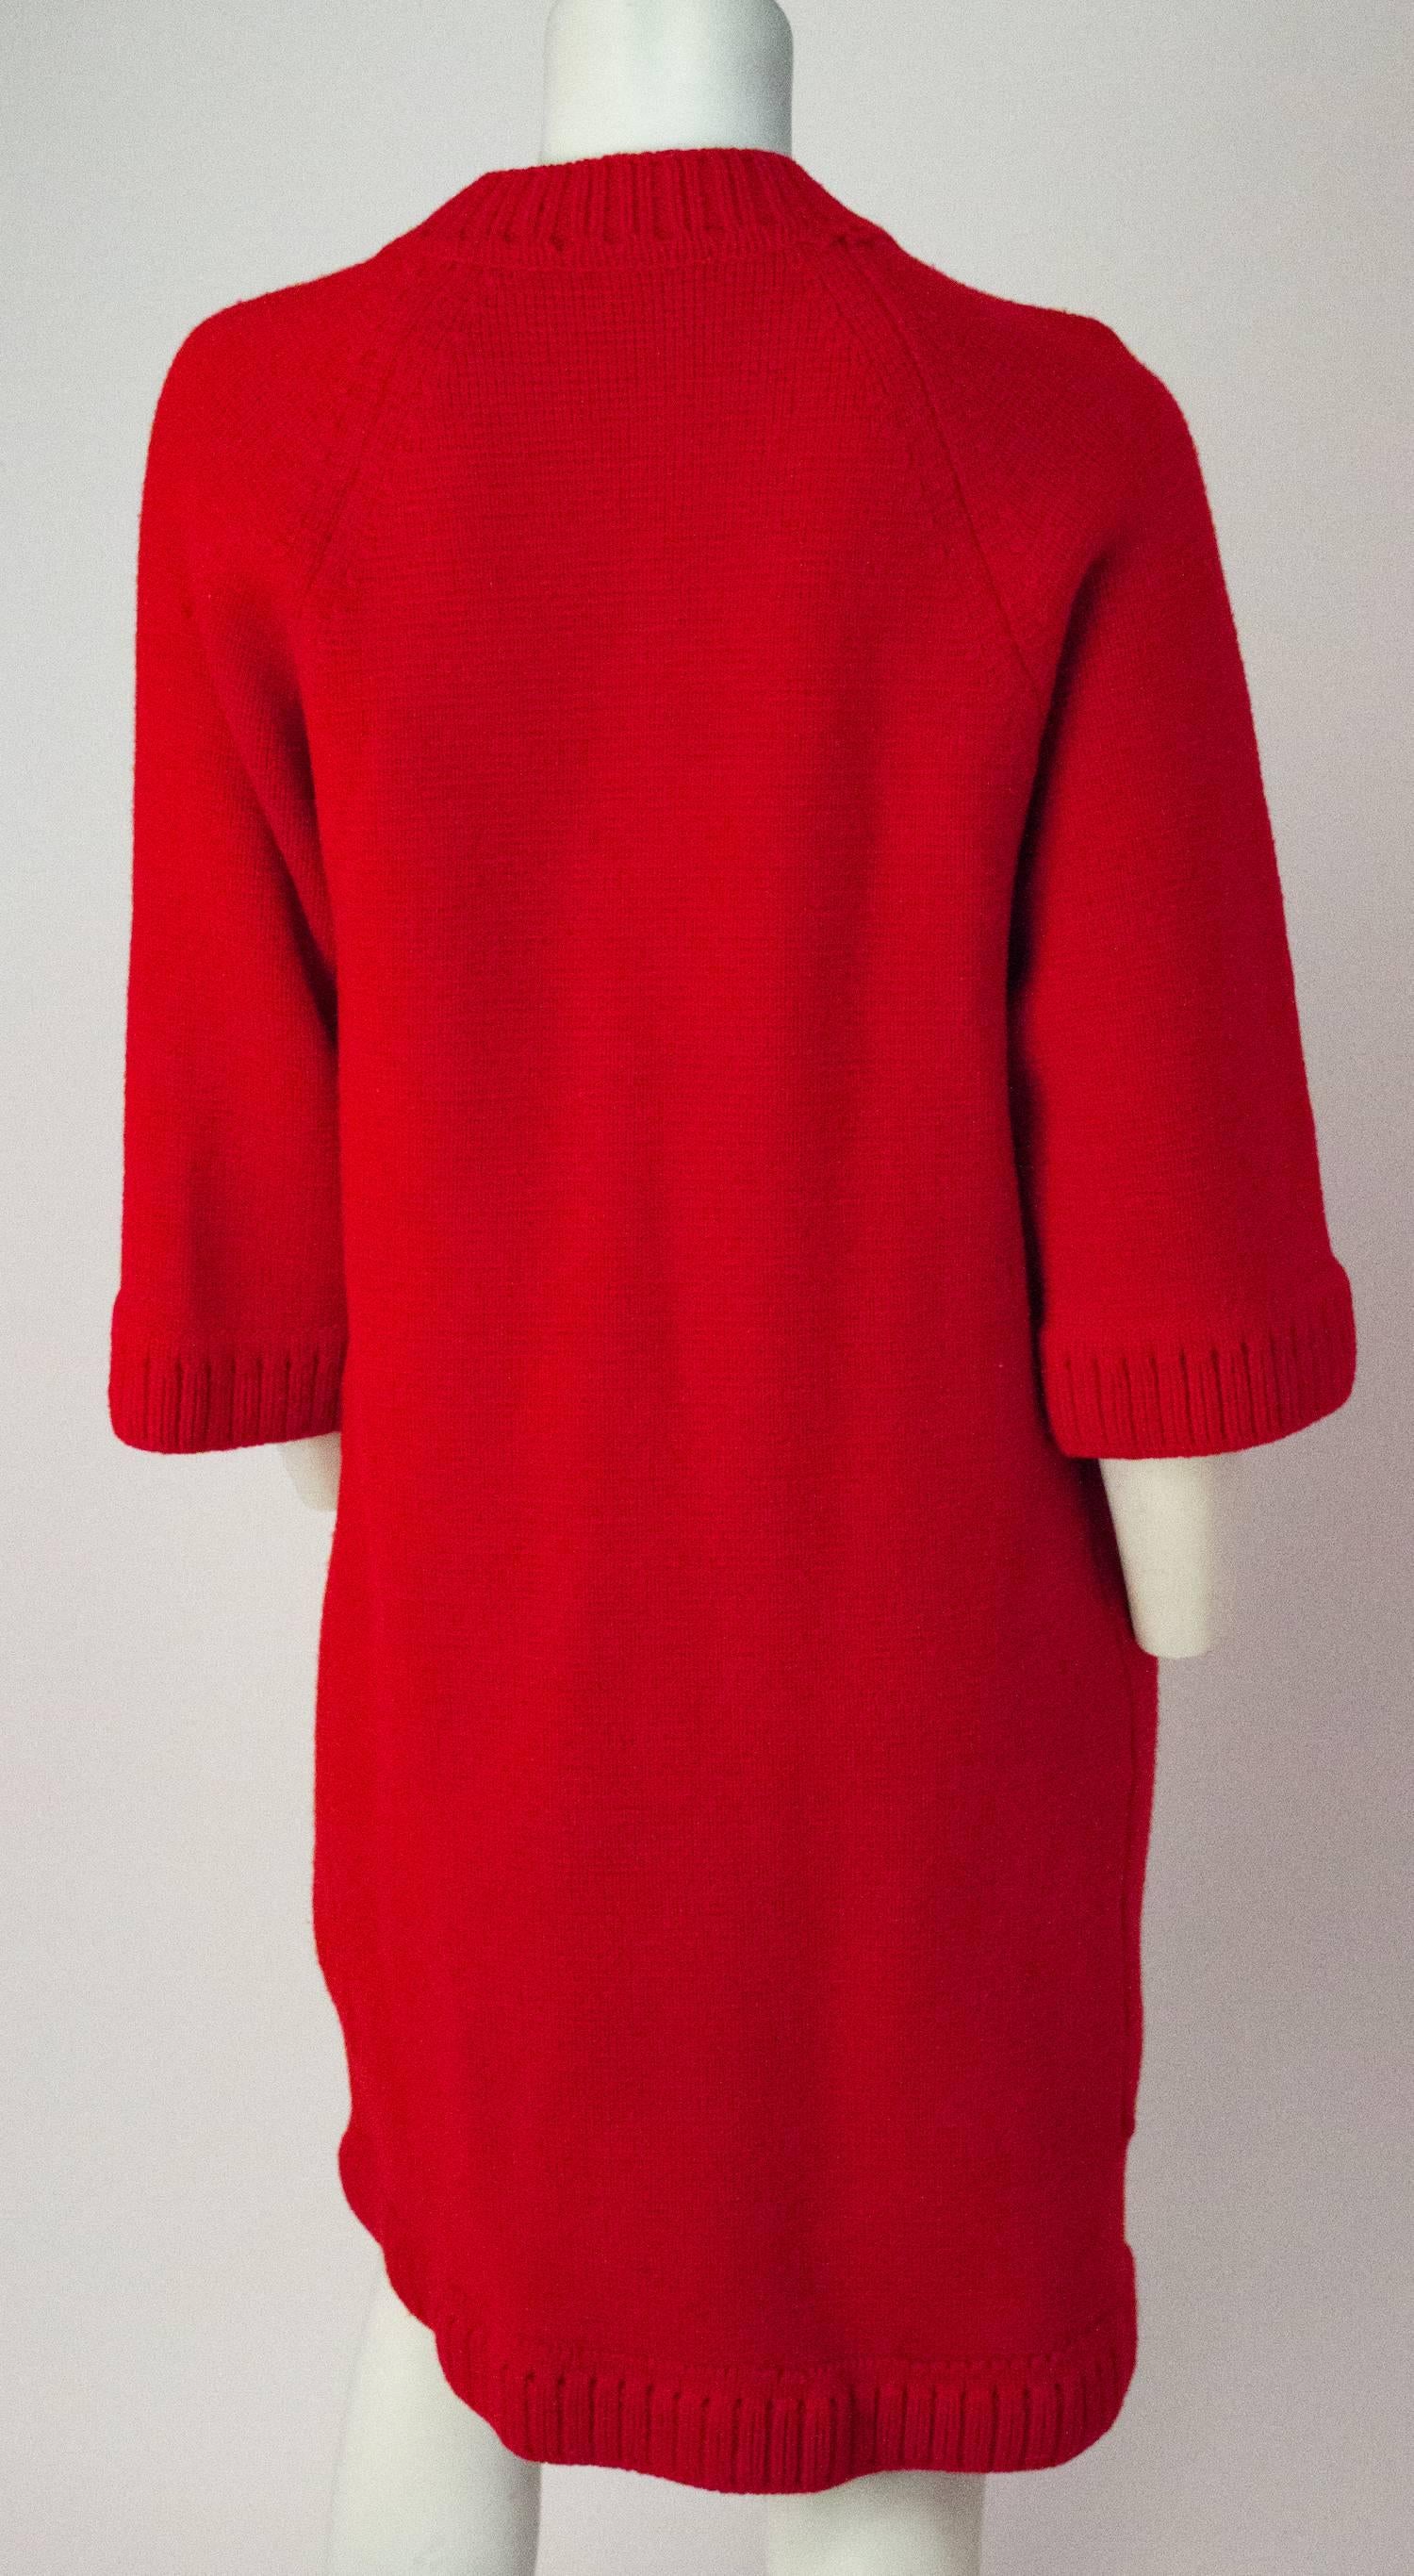 60s Red Sweater Dress In Good Condition For Sale In San Francisco, CA